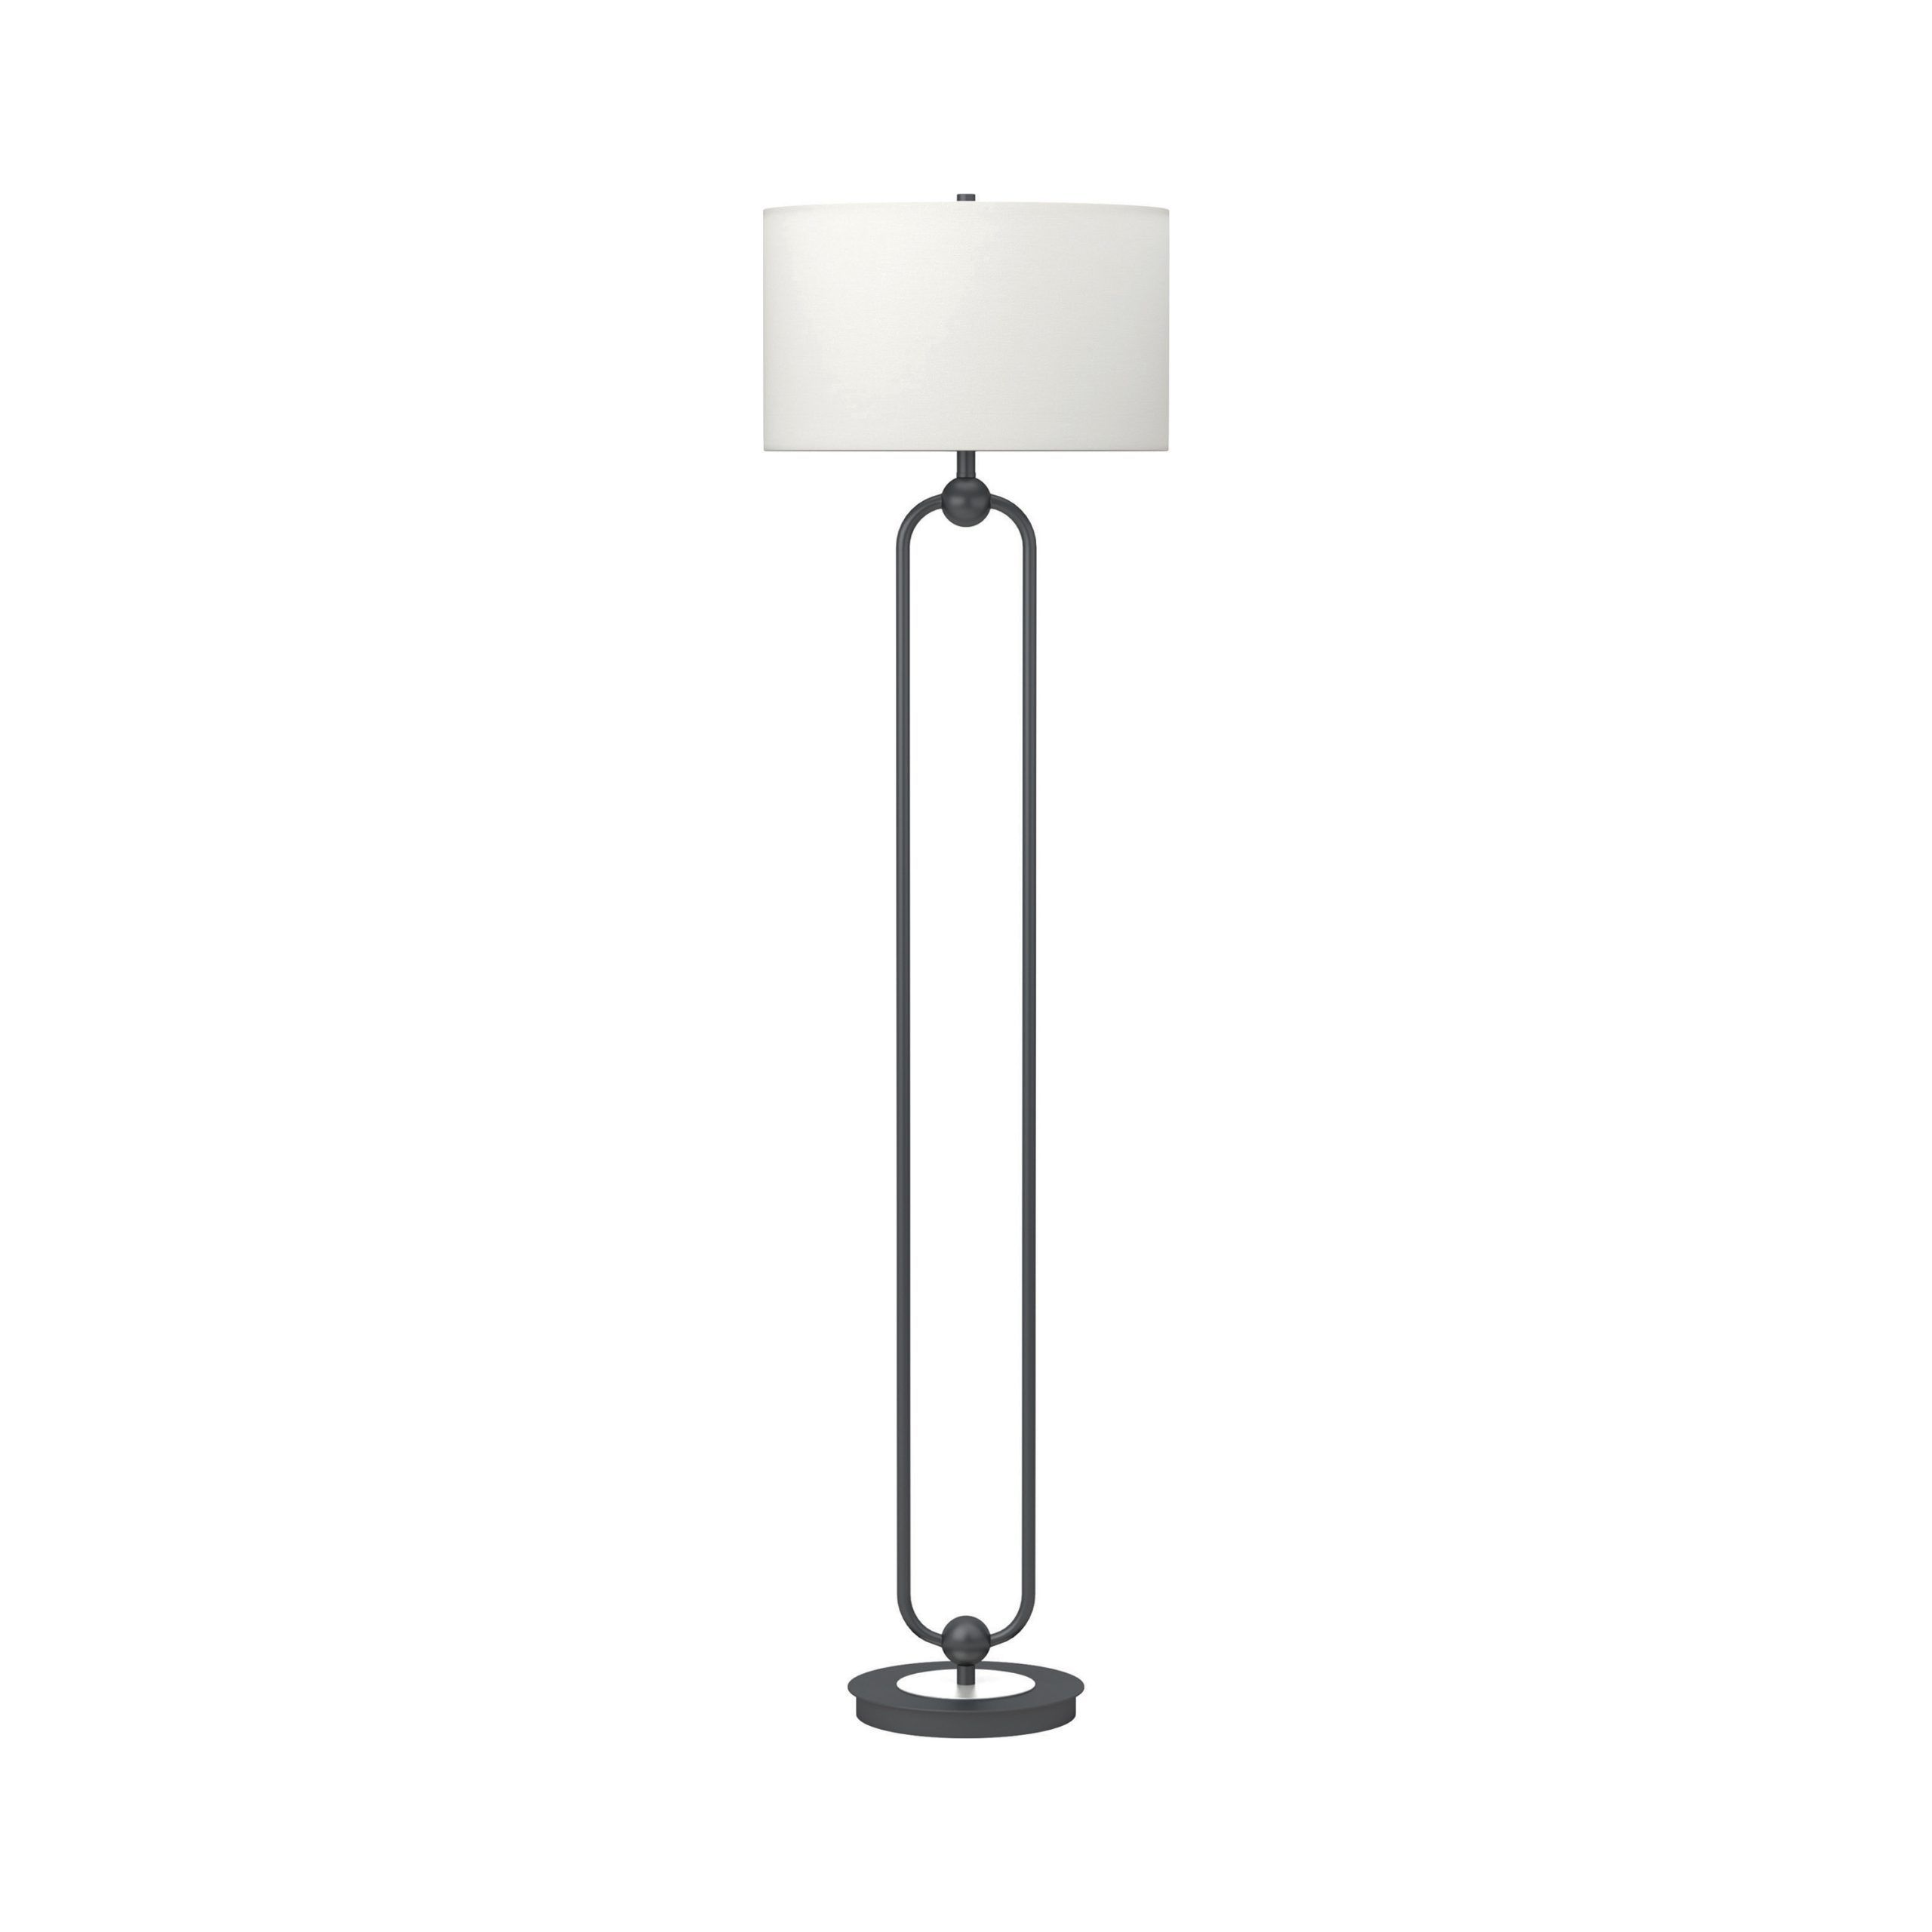 White Shade Floor Lamps Pertaining To Widely Used Drum Shade Floor Lamp White And Orb – Coaster Fine Furniture (View 9 of 15)